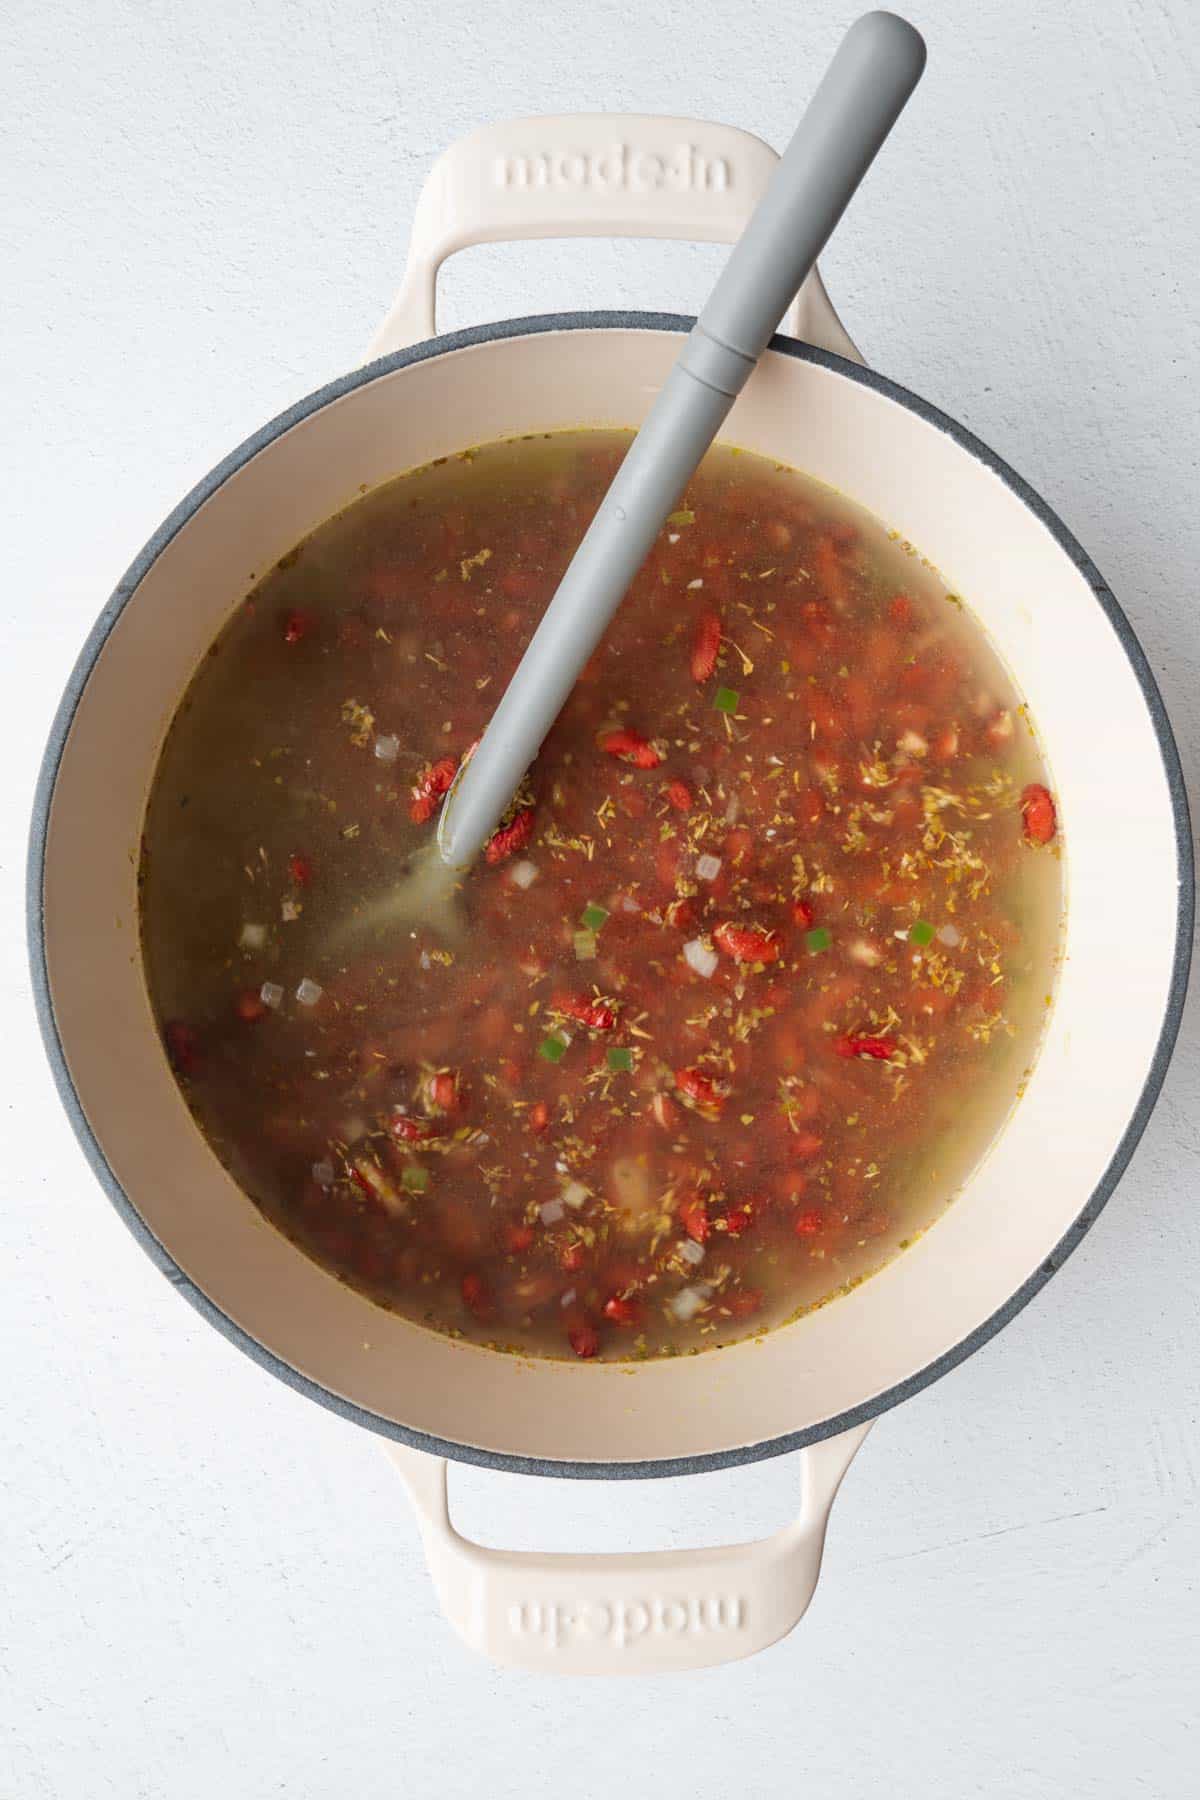 Red beans, herbs, and chopped veggies cooking in water in a white saucepan.